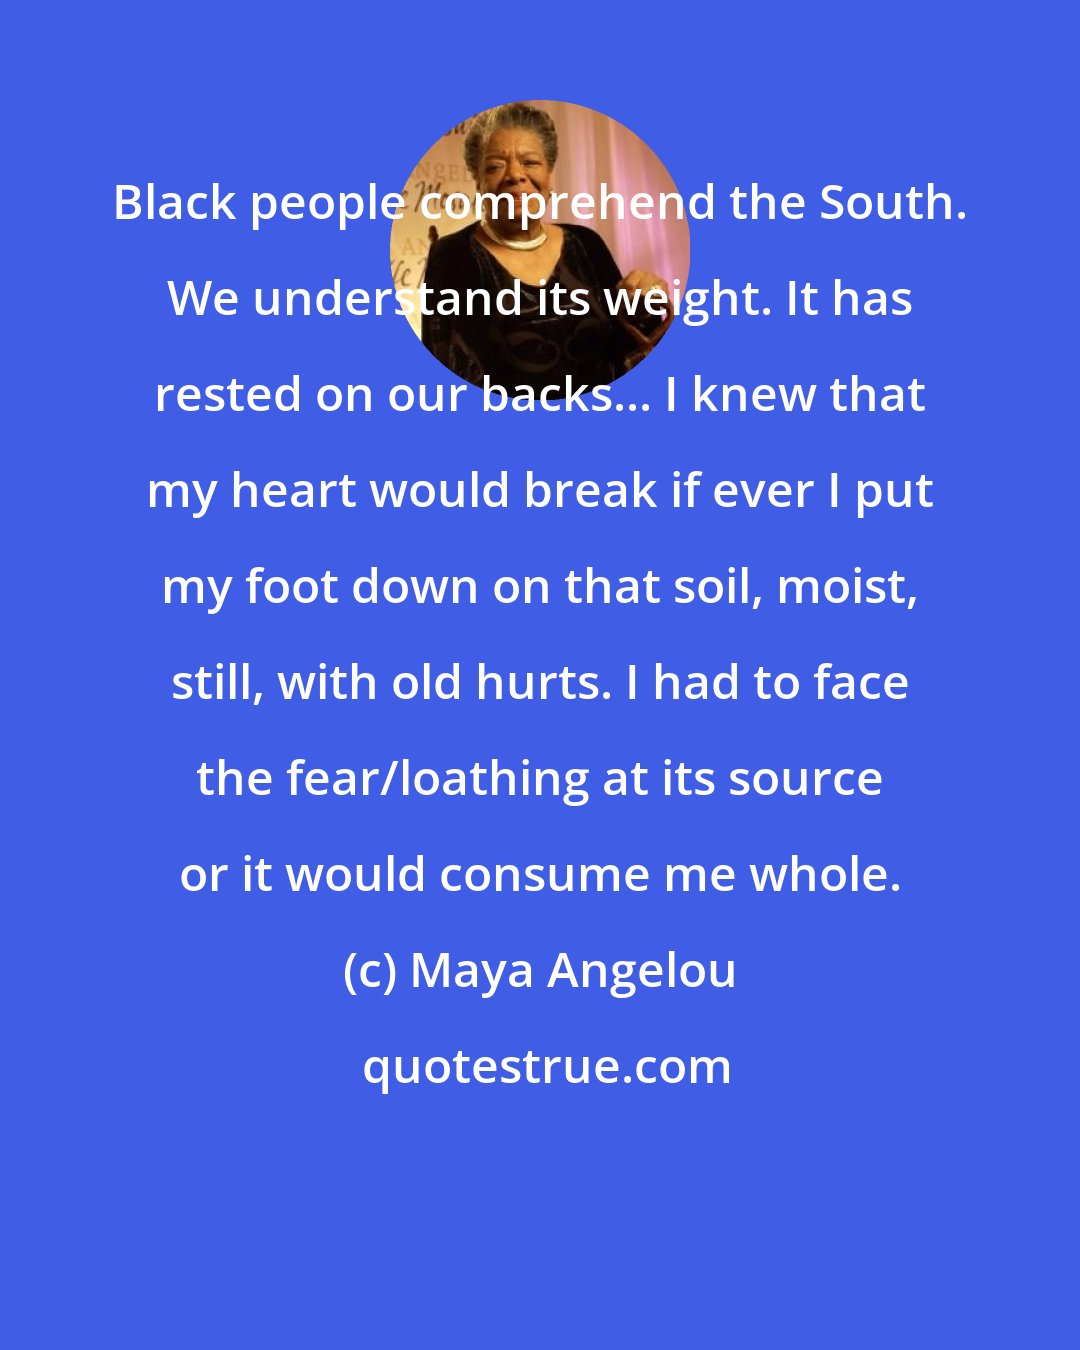 Maya Angelou: Black people comprehend the South. We understand its weight. It has rested on our backs... I knew that my heart would break if ever I put my foot down on that soil, moist, still, with old hurts. I had to face the fear/loathing at its source or it would consume me whole.